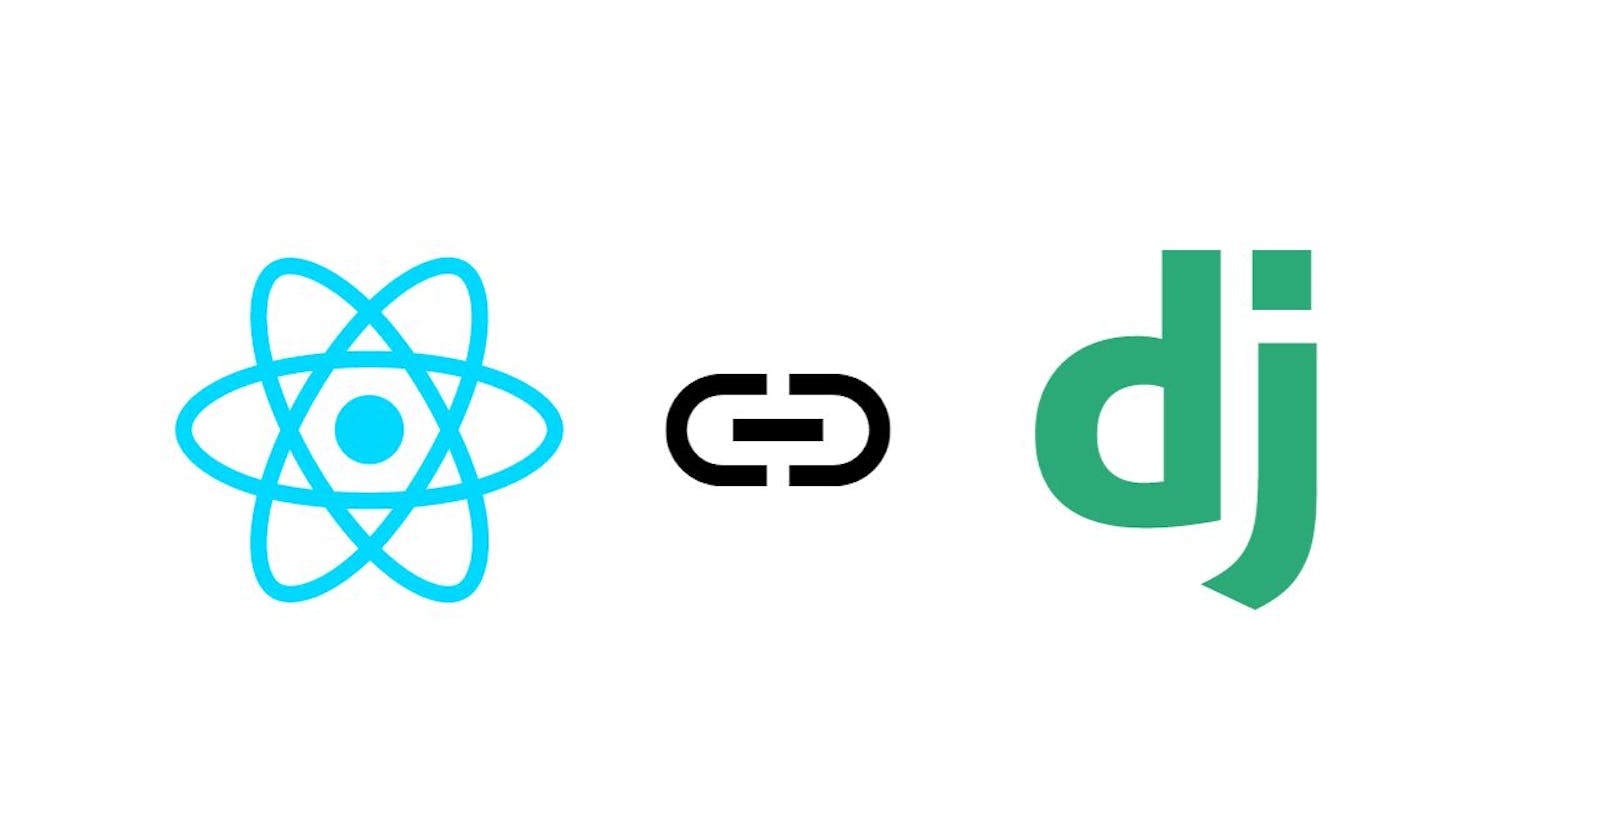 How to connect the React JS frontend with the Django backend